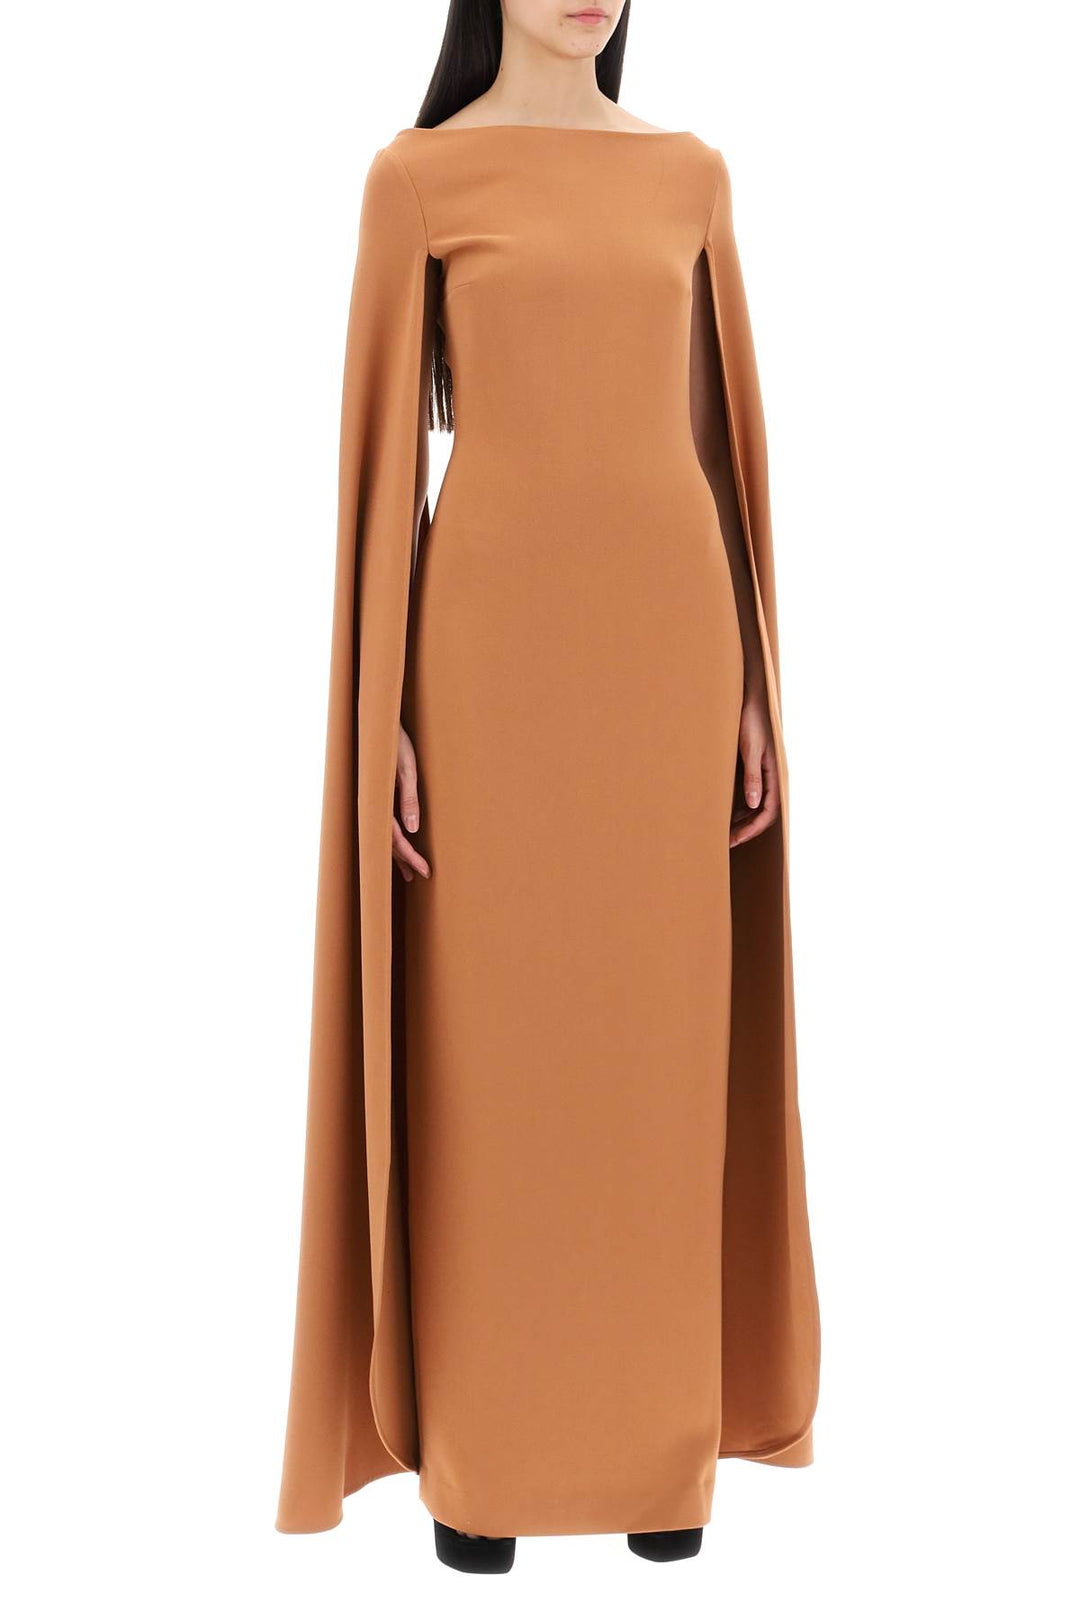 Solace London Maxi Dress Sadie With Cape Sleeves   Marrone